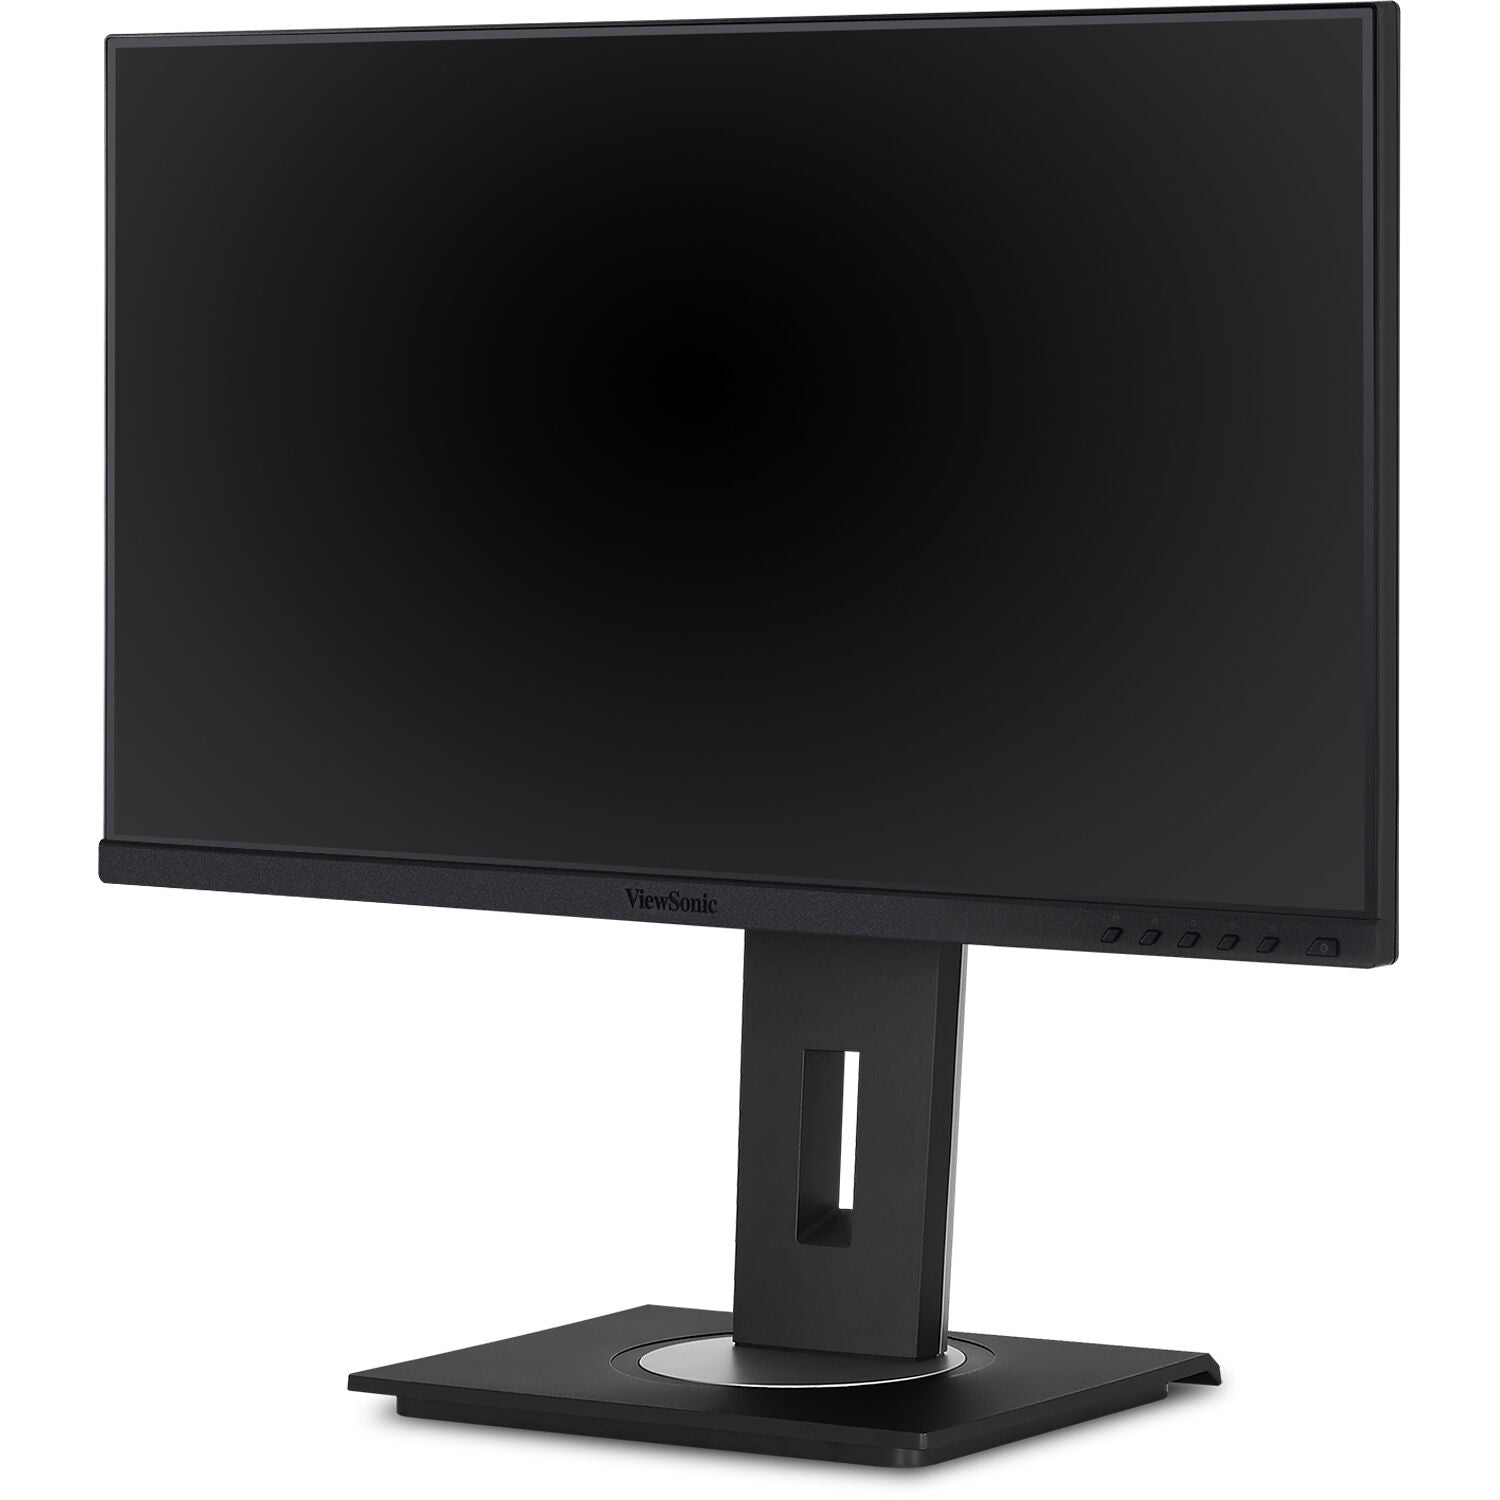 ViewSonic VG2448A-2-S 24" IPS Full HD Monitor - Certified Refurbished